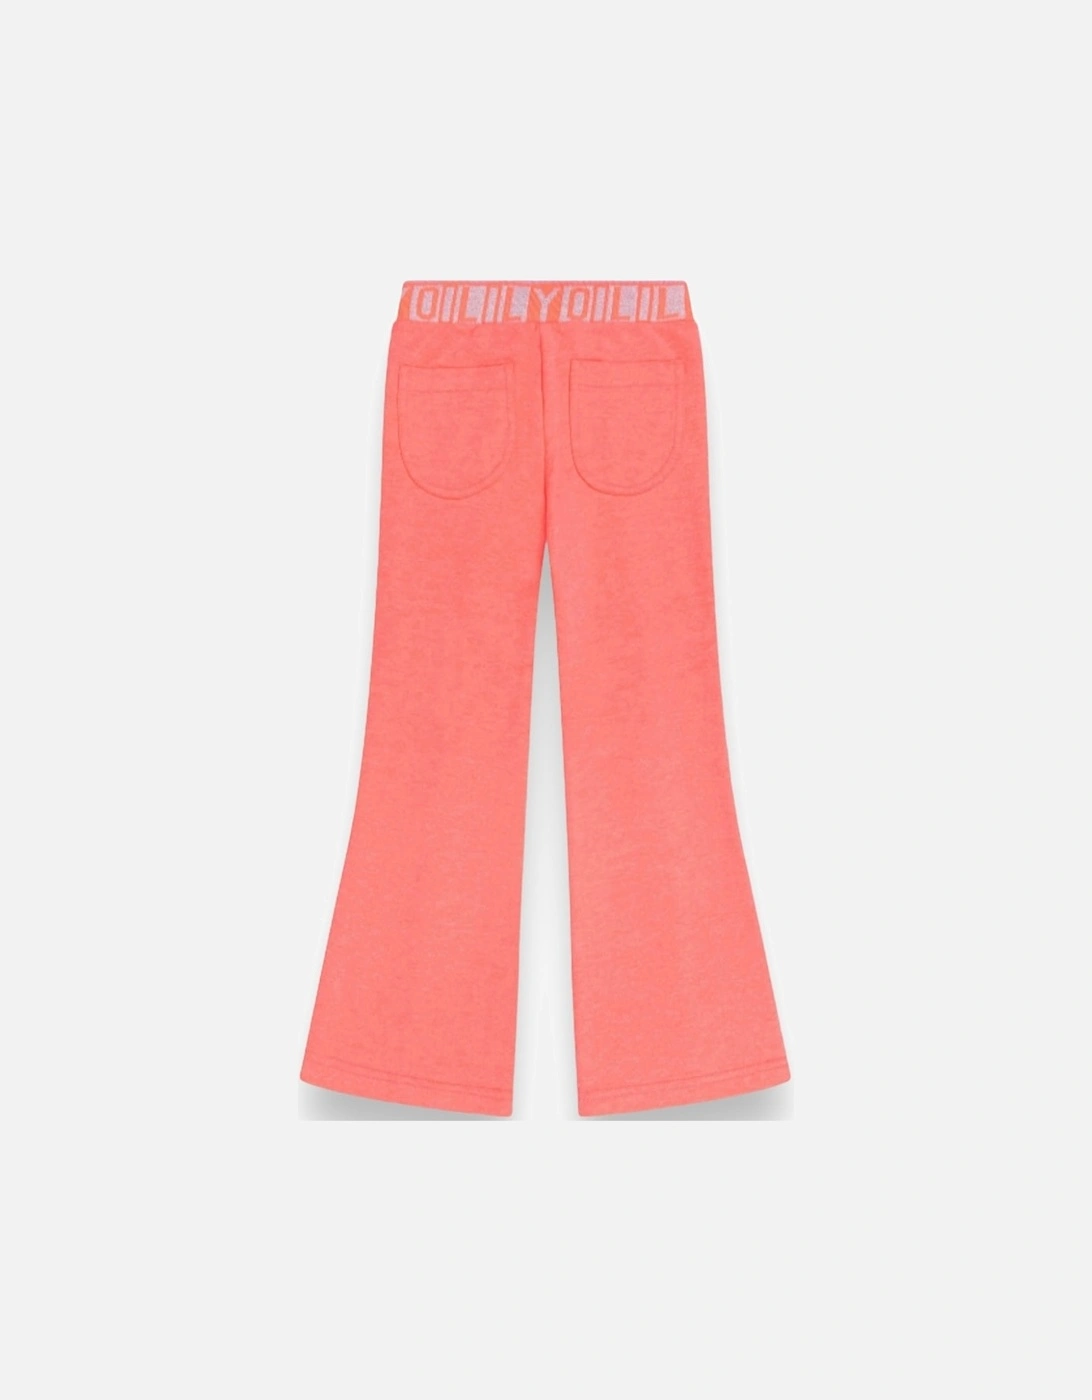 Coral ‘Pepper’ Flared Sweat Pants